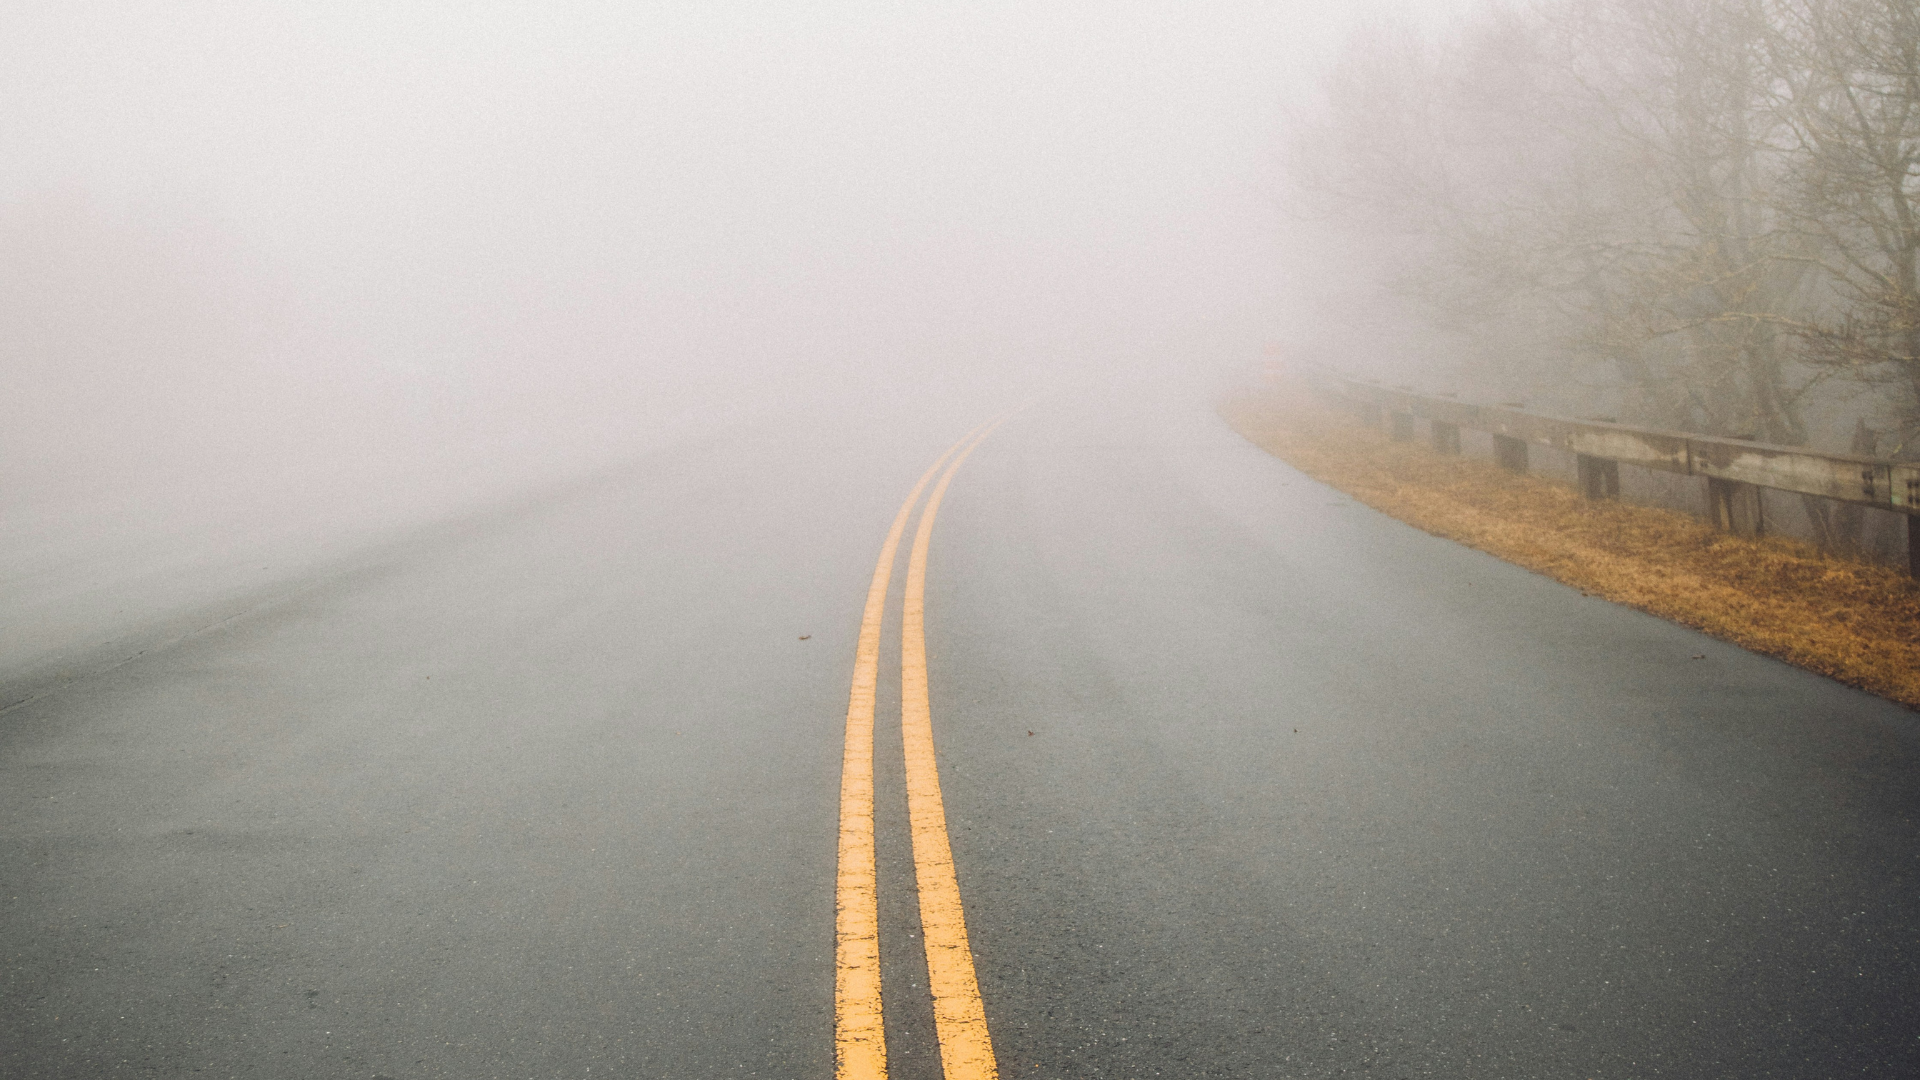 A dense gray fog covers a winding road